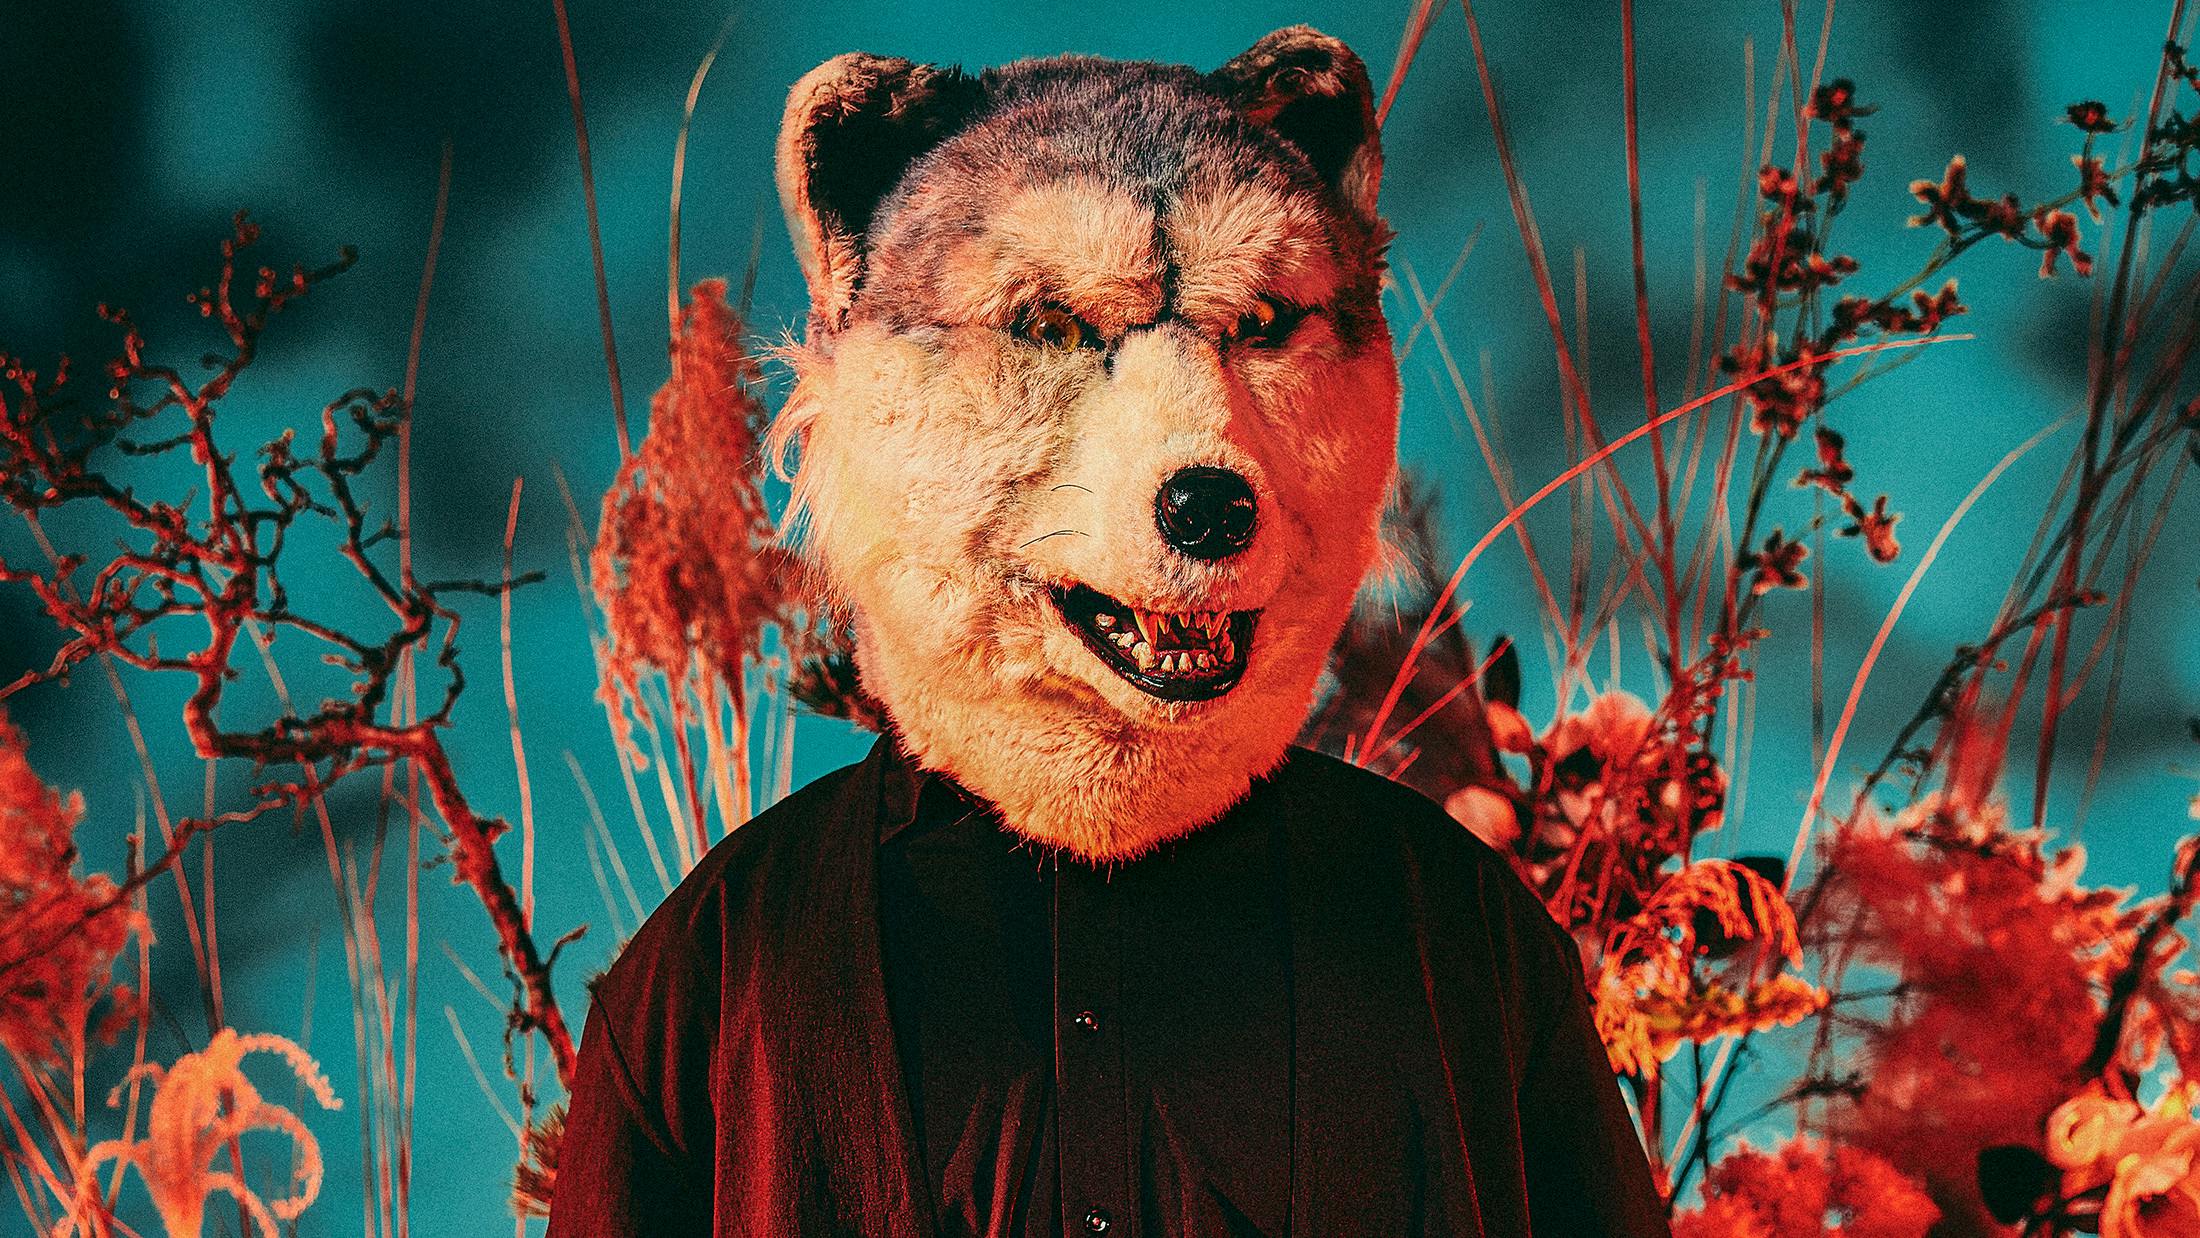 MAN WITH A MISSION: The 10 songs that changed my life